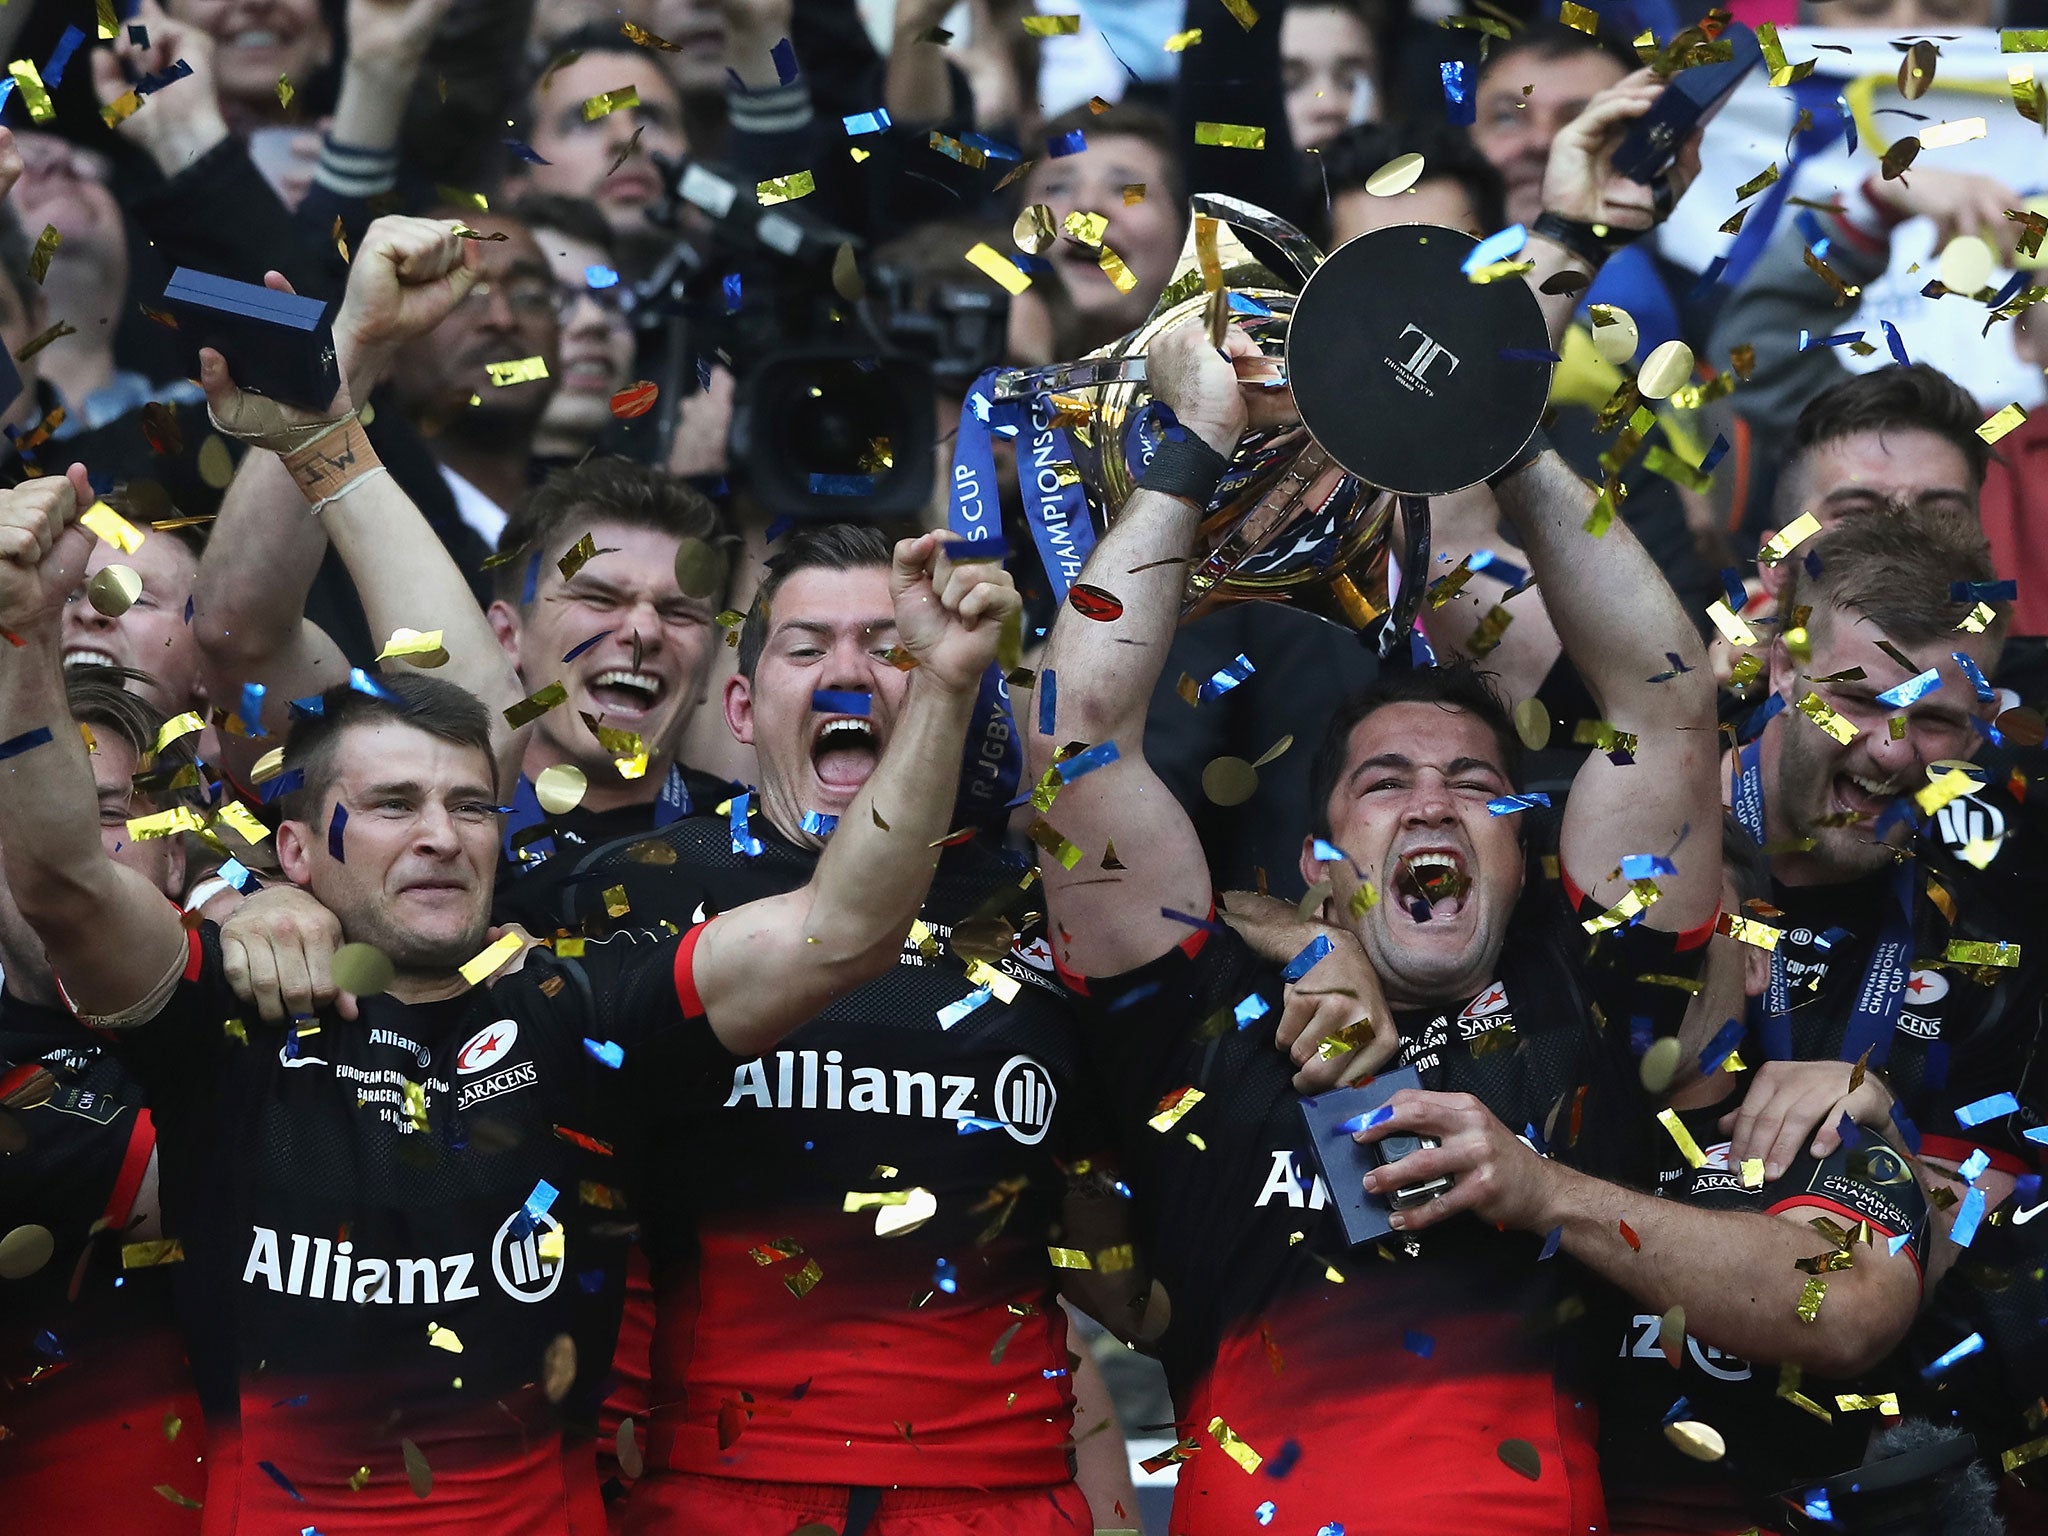 Saracens players left the trophy as they celebrate becoming champions of Europe for the first time